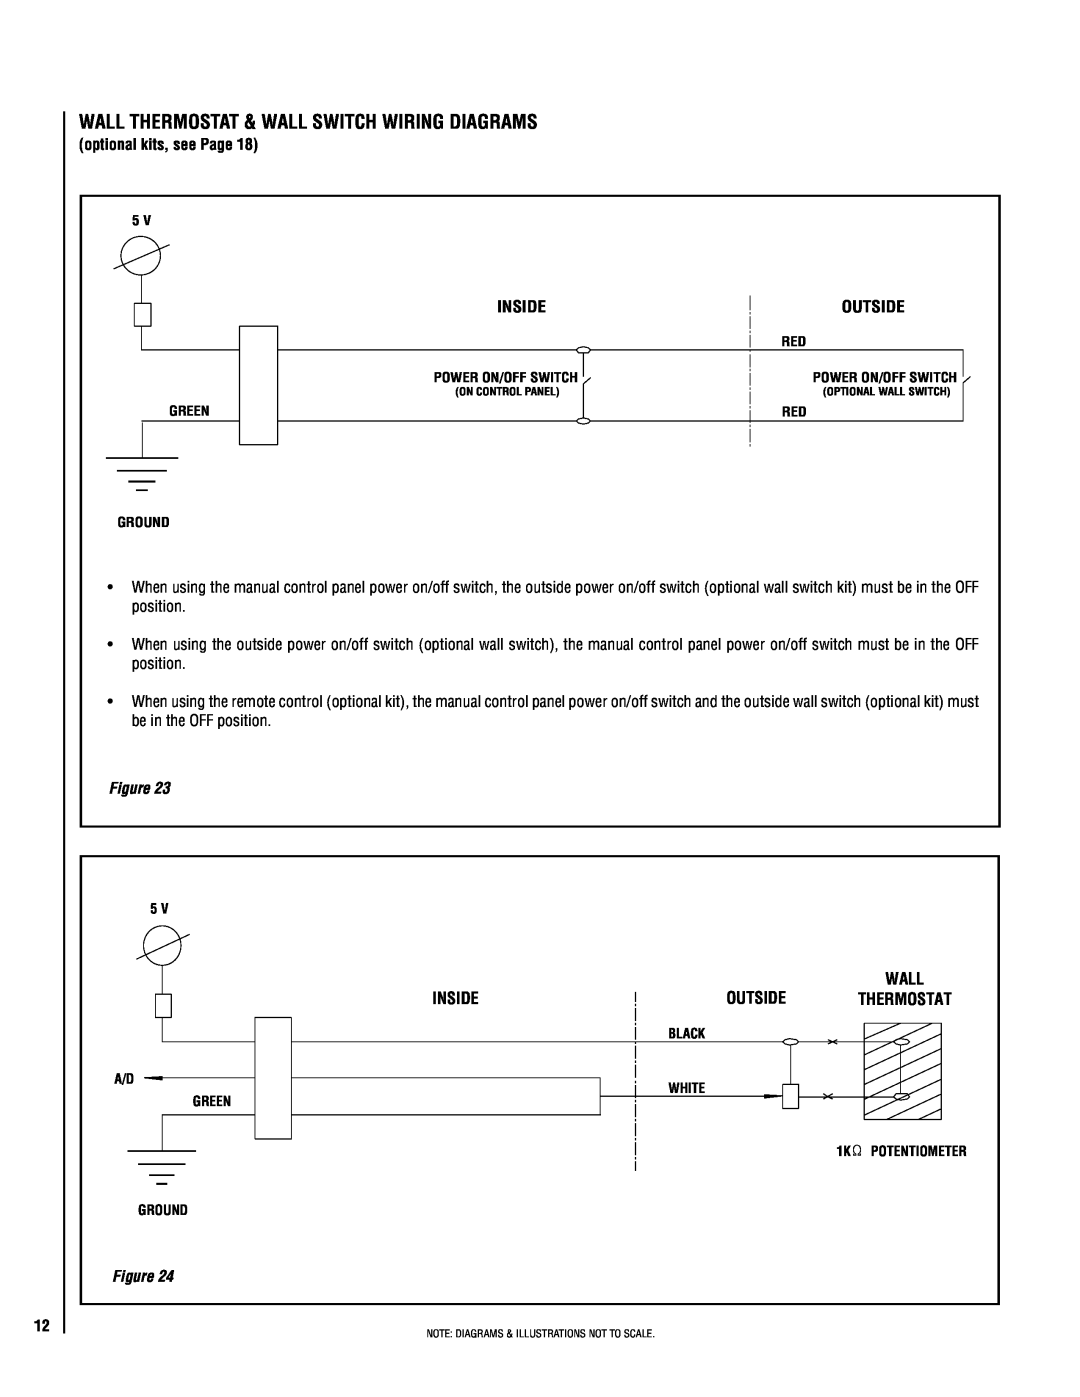 Lennox Hearth MPE-36R warranty Wall Thermostat & Wall Switch Wiring Diagrams, Inside, Outside 